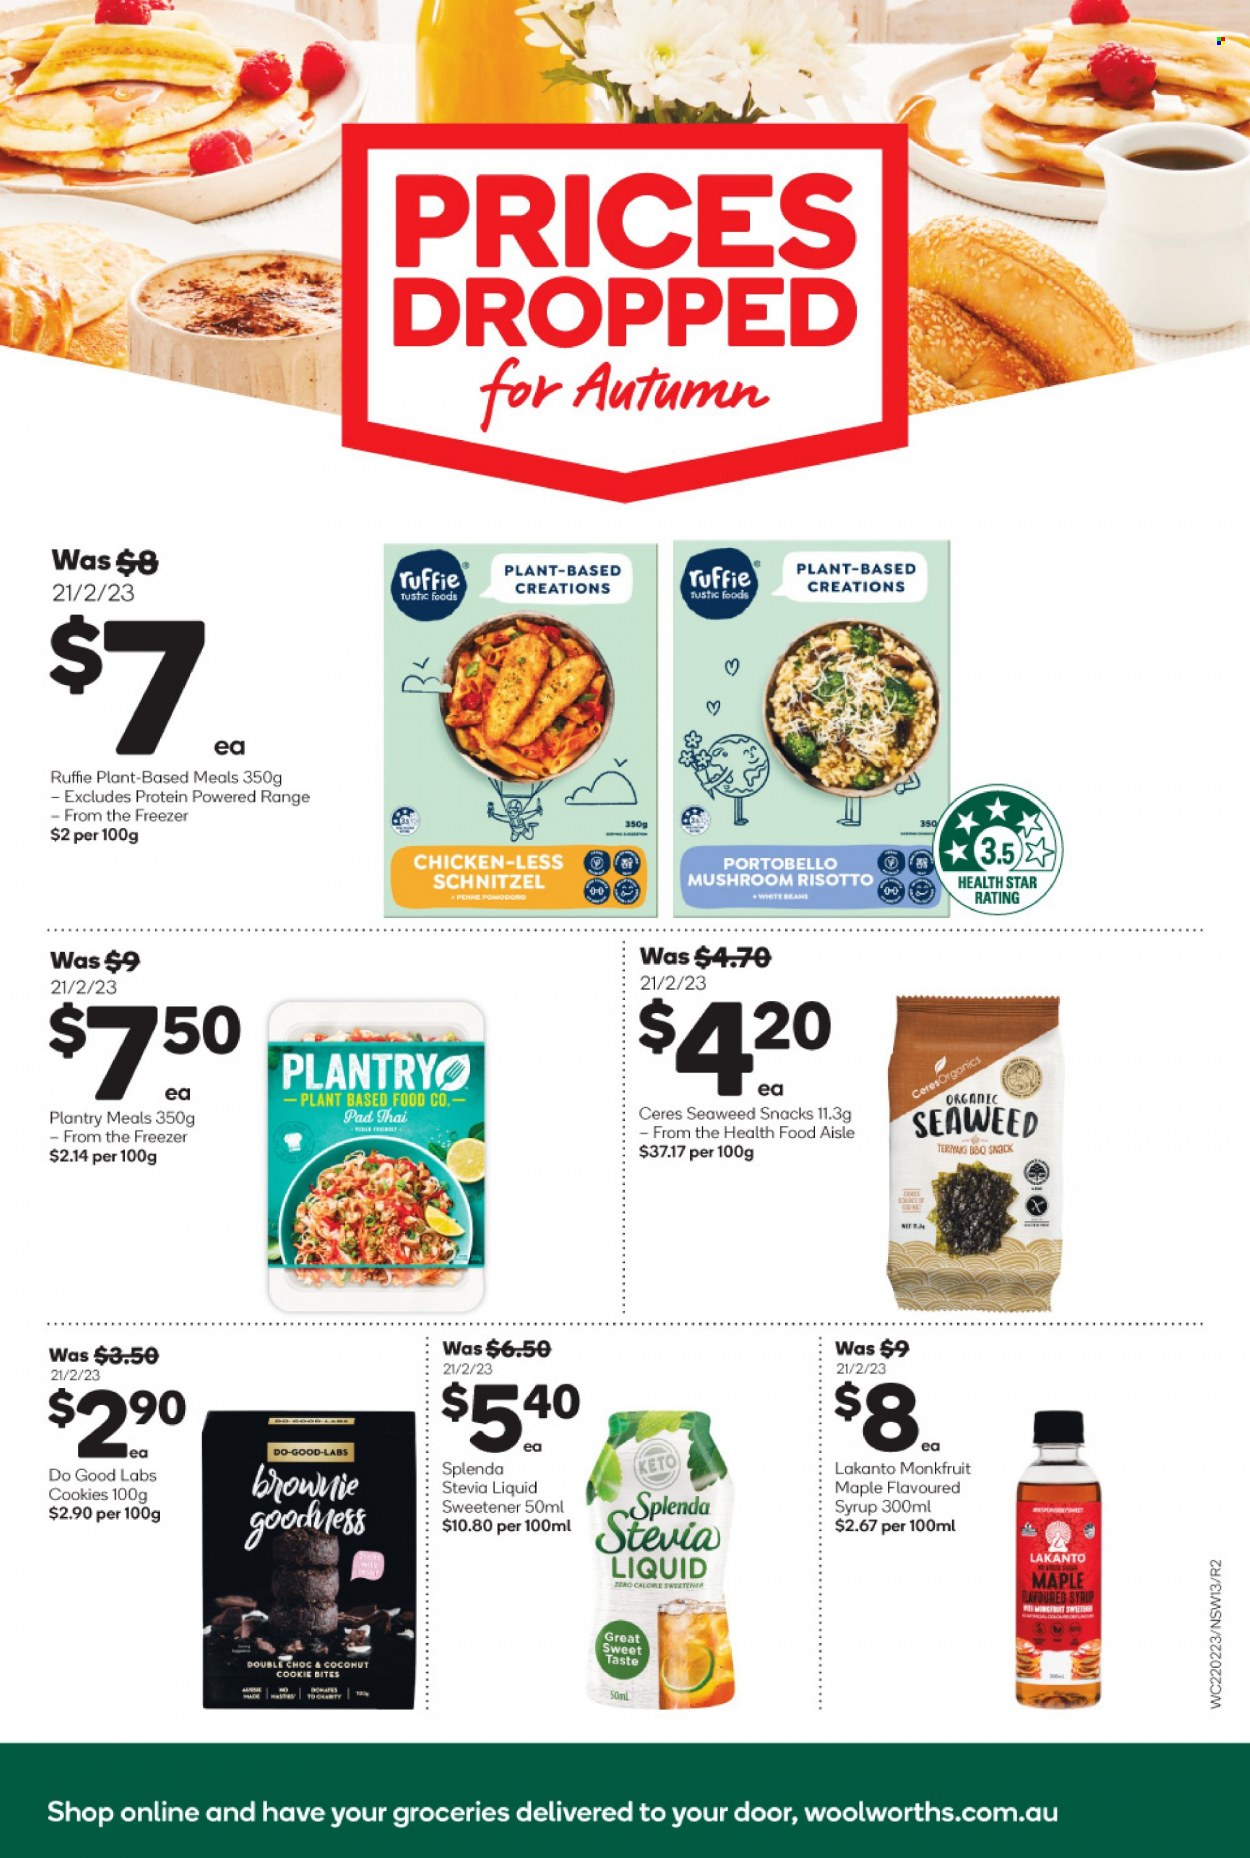 thumbnail - Woolworths Catalogue - 22 Feb 2023 - 23 May 2023 - Sales products - portobello mushrooms, mushrooms, brownies, beans, risotto, schnitzel, cookies, snack, stevia, sweetener, penne, syrup, Cerés. Page 13.